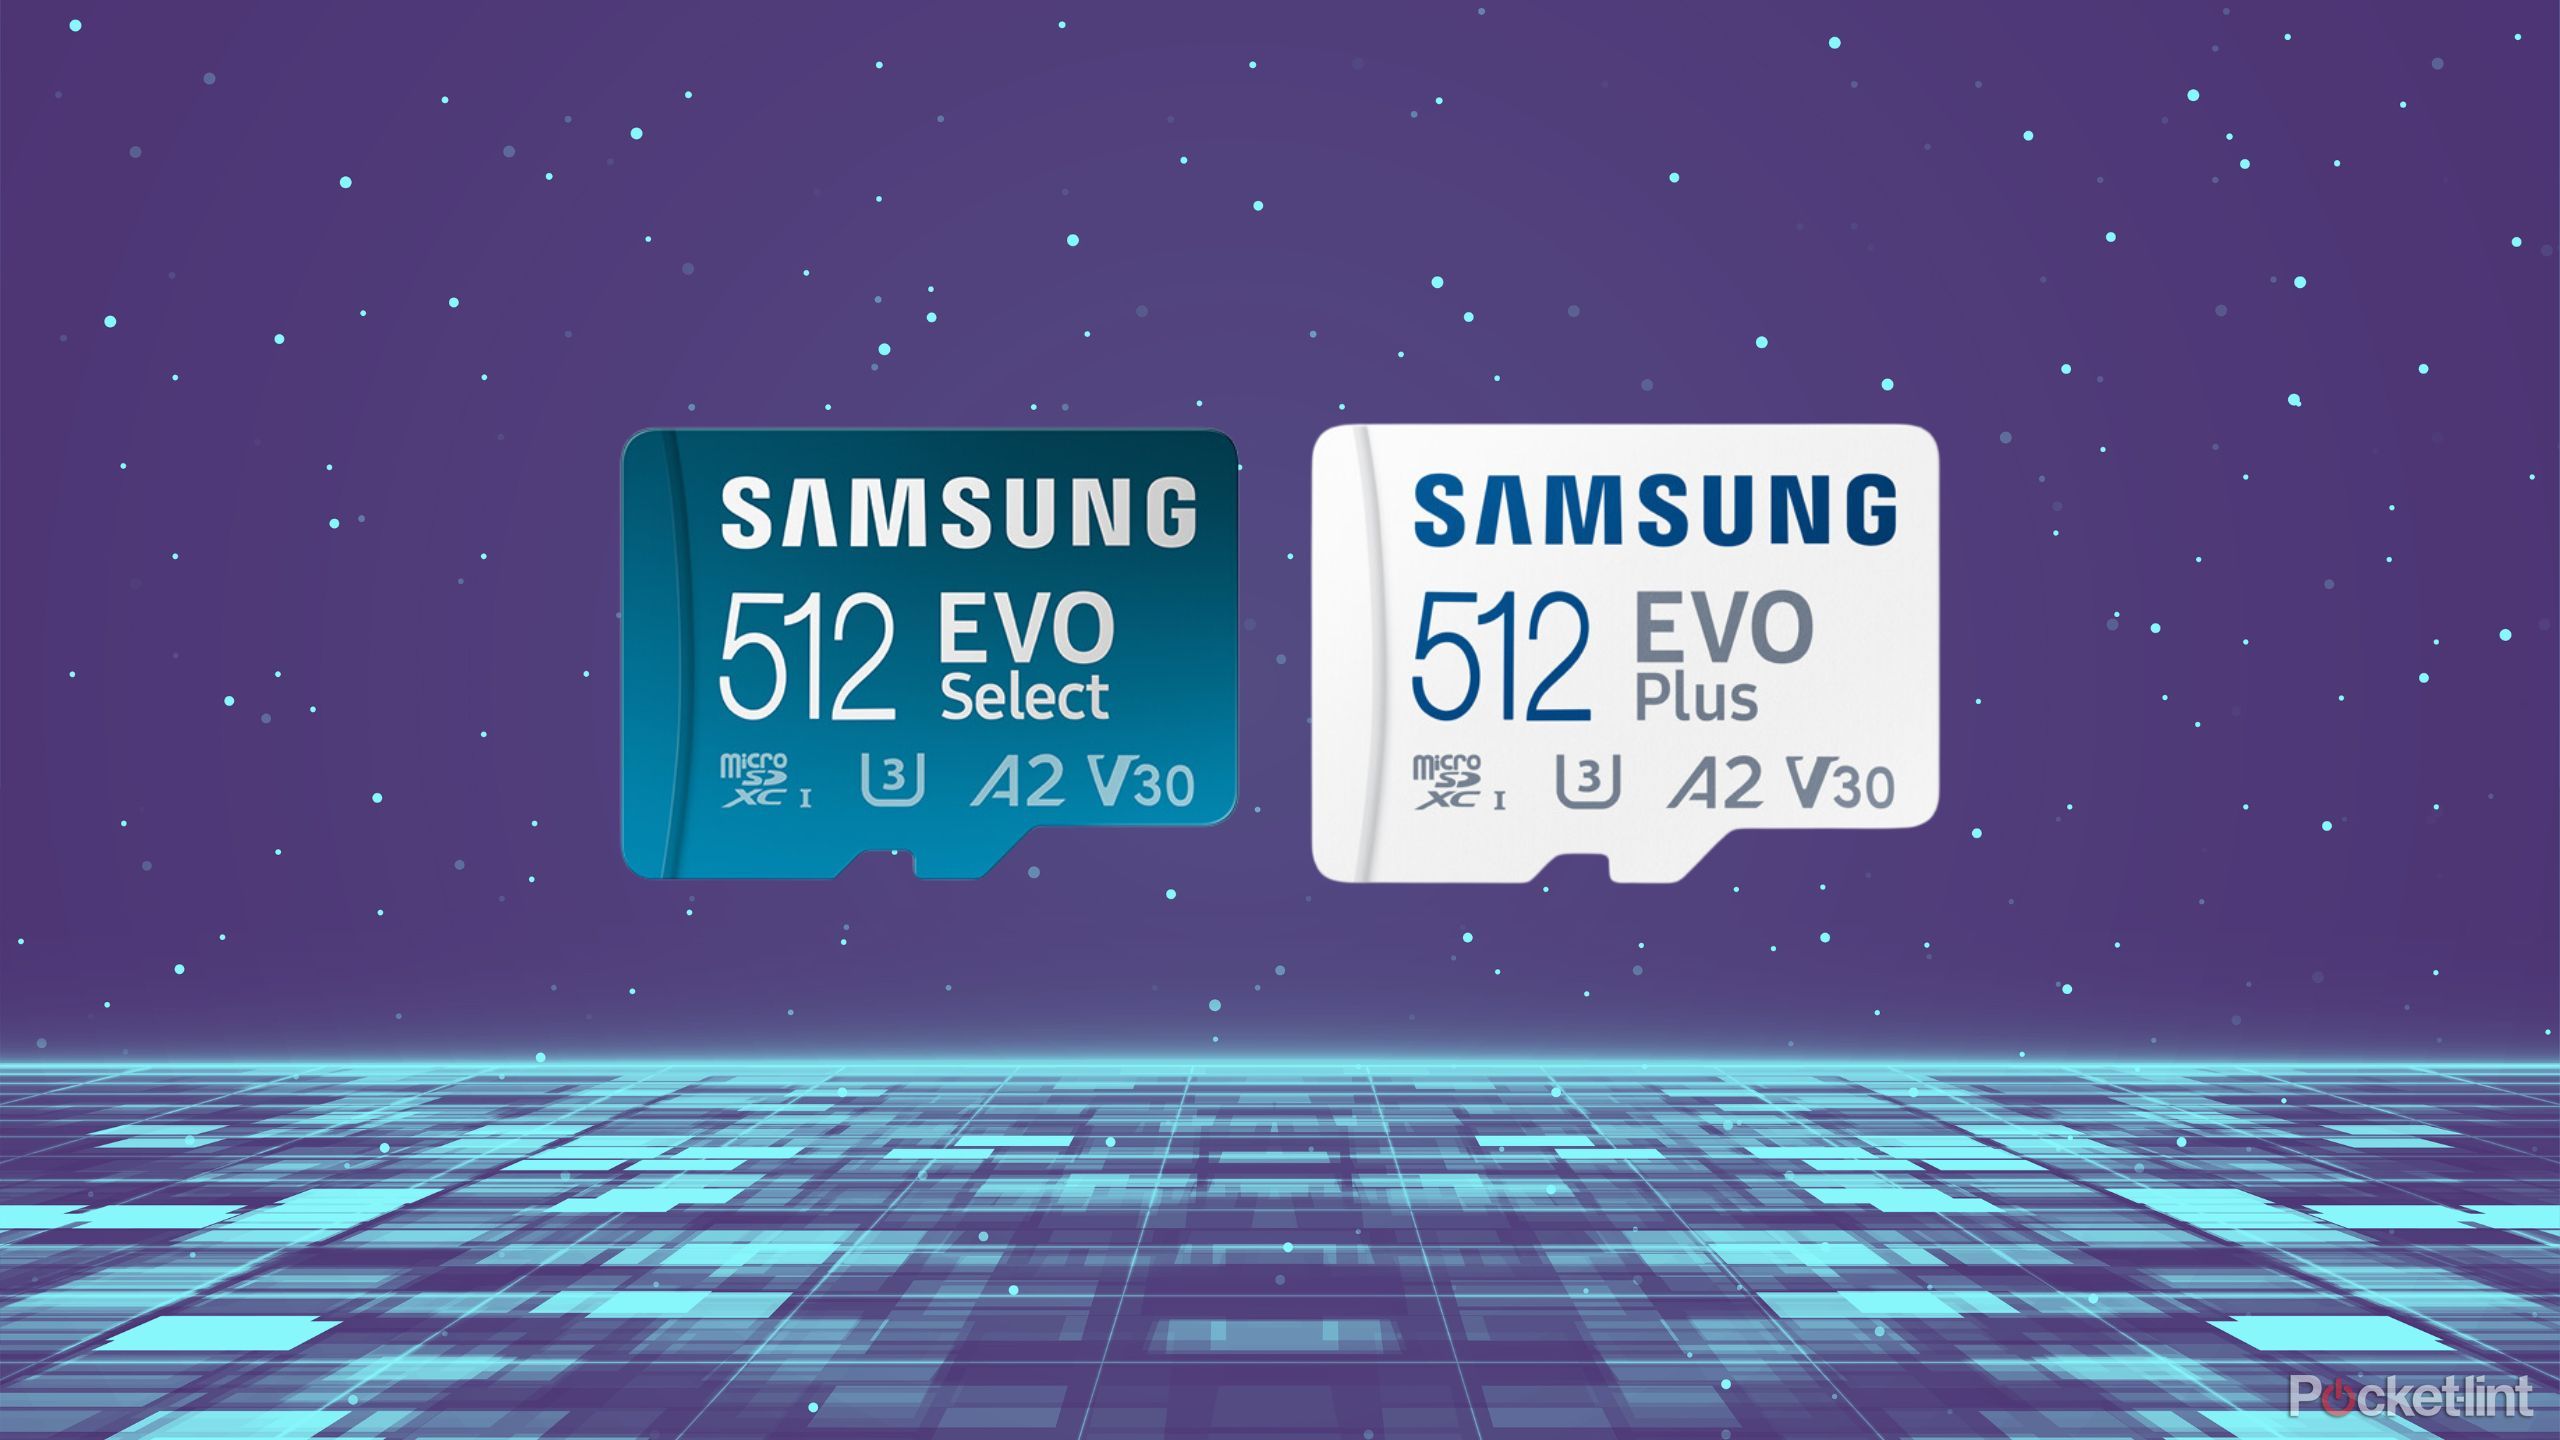 Samsung's affordable EVO microSD cards are now faster and have a 1TB option